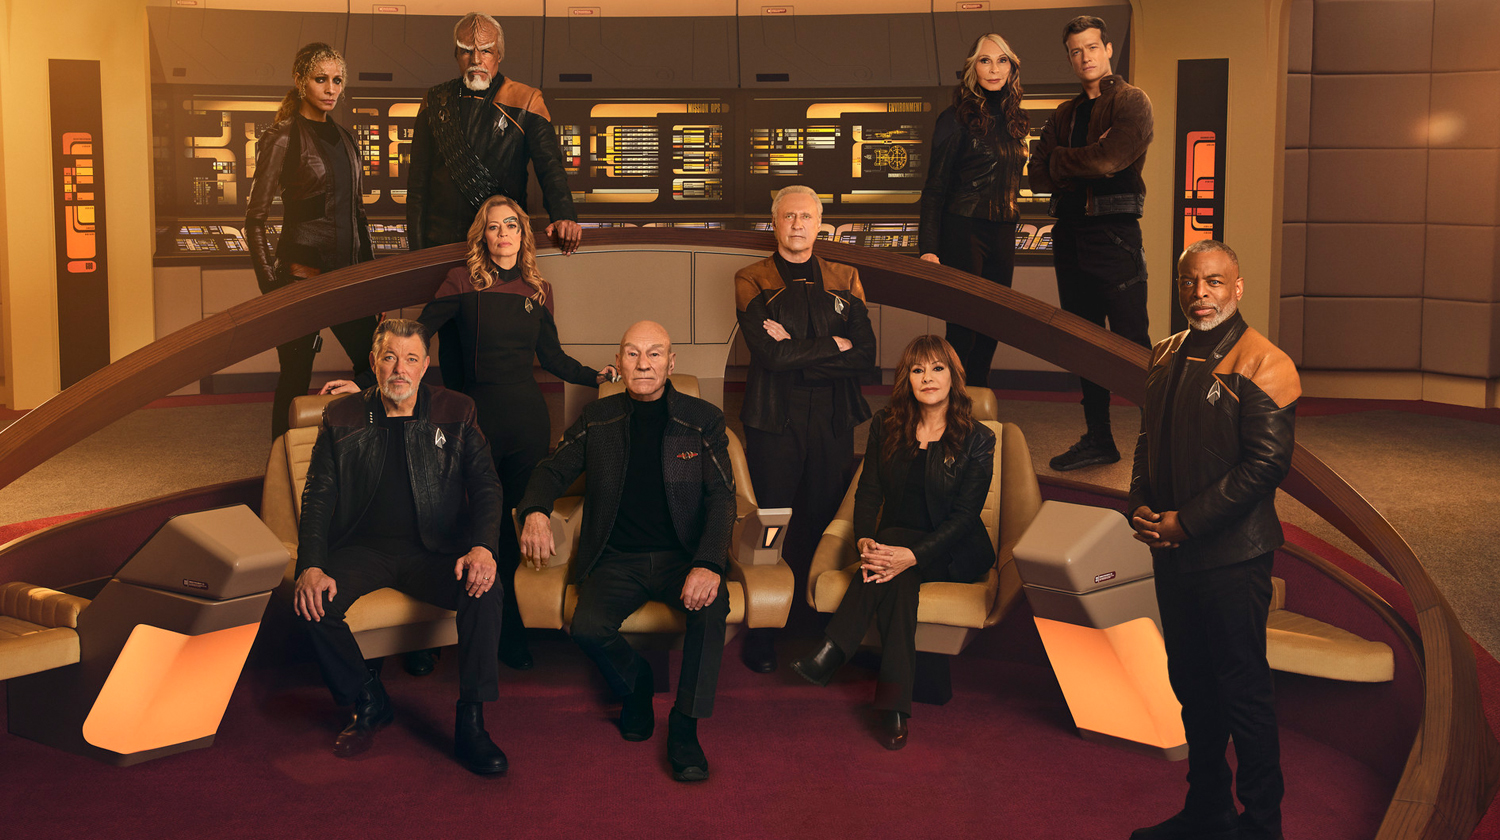 New ‘Star Trek’ movie featuring Picard is on the way, Patrick Stewart says